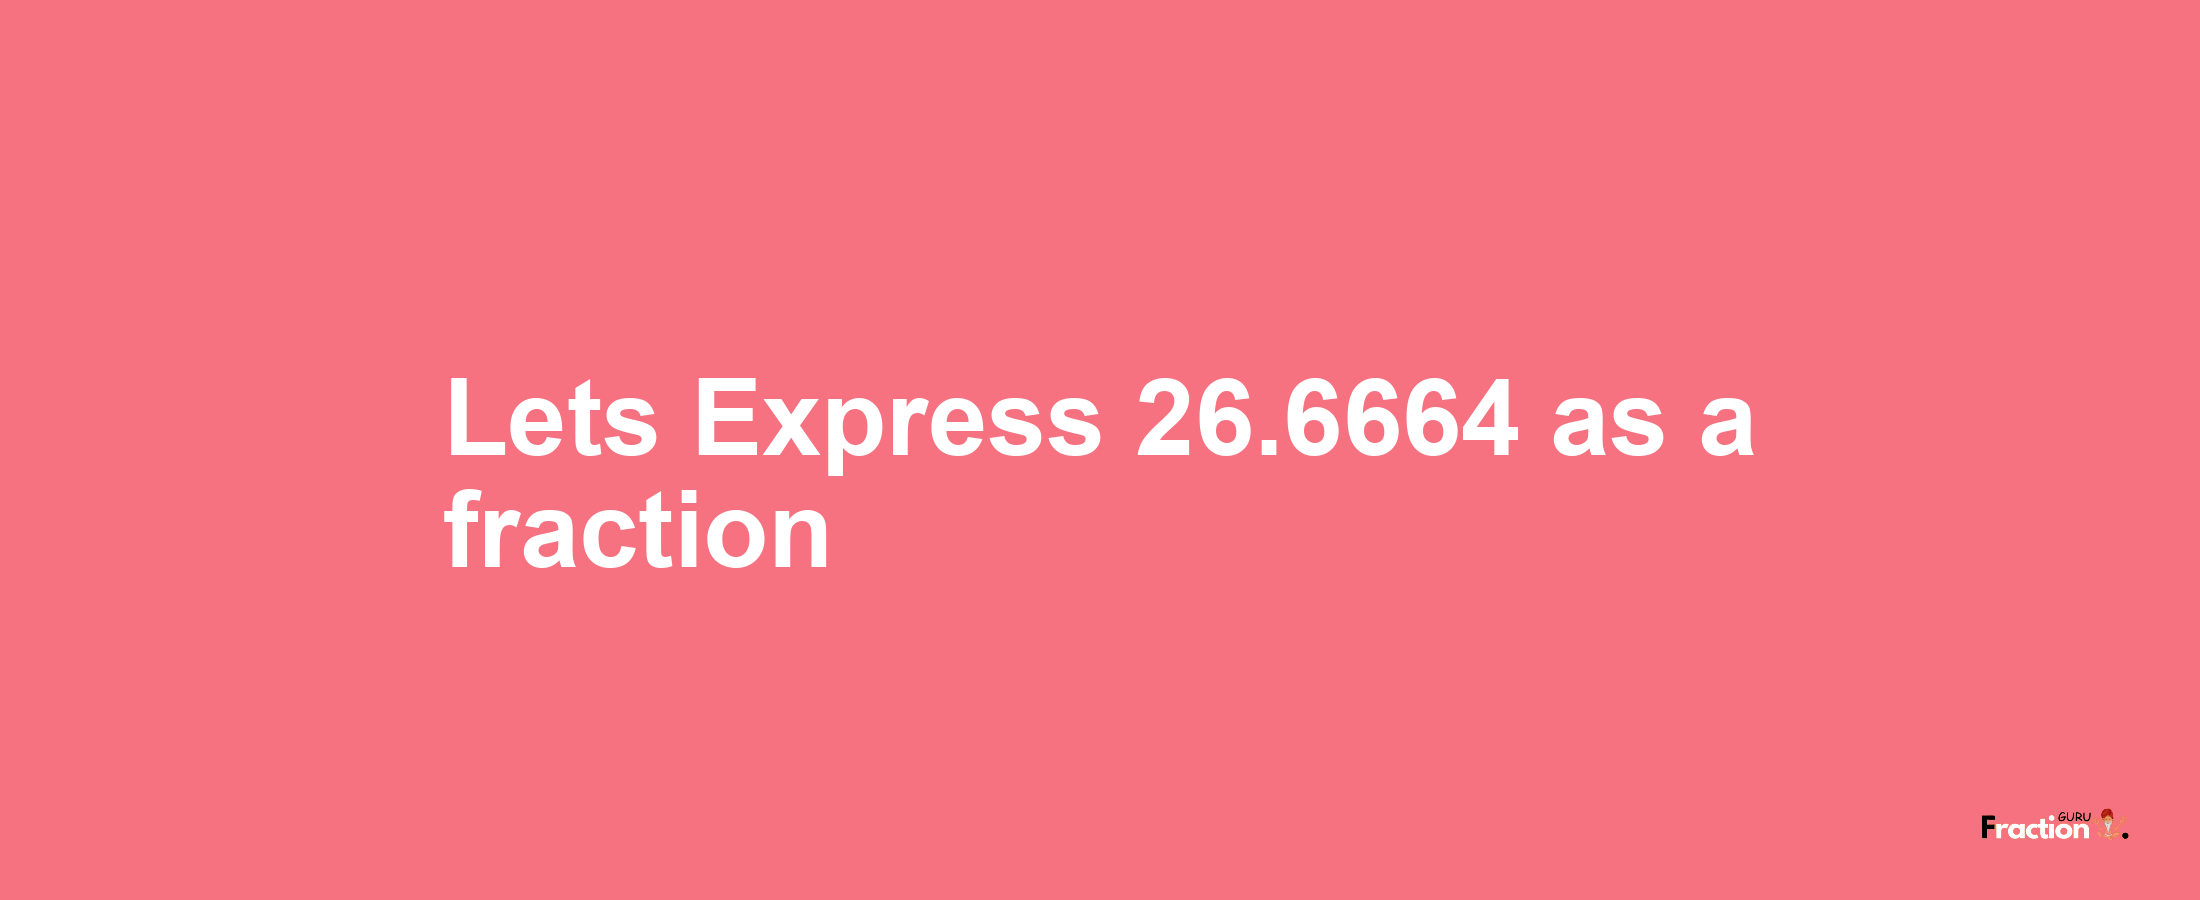 Lets Express 26.6664 as afraction